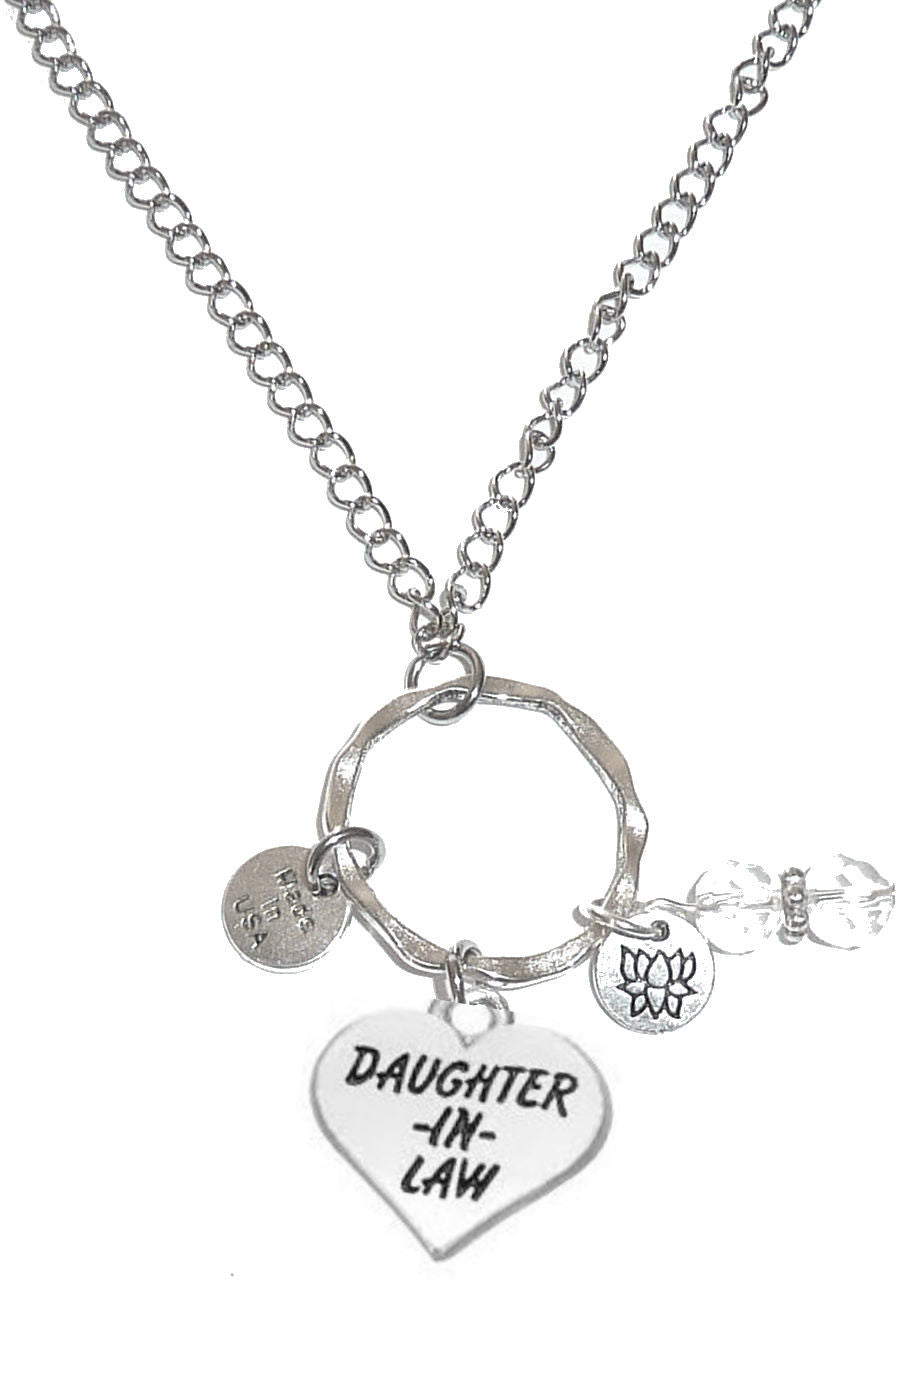 Daughter-in-Law Charm - Rearview Mirror Accessory